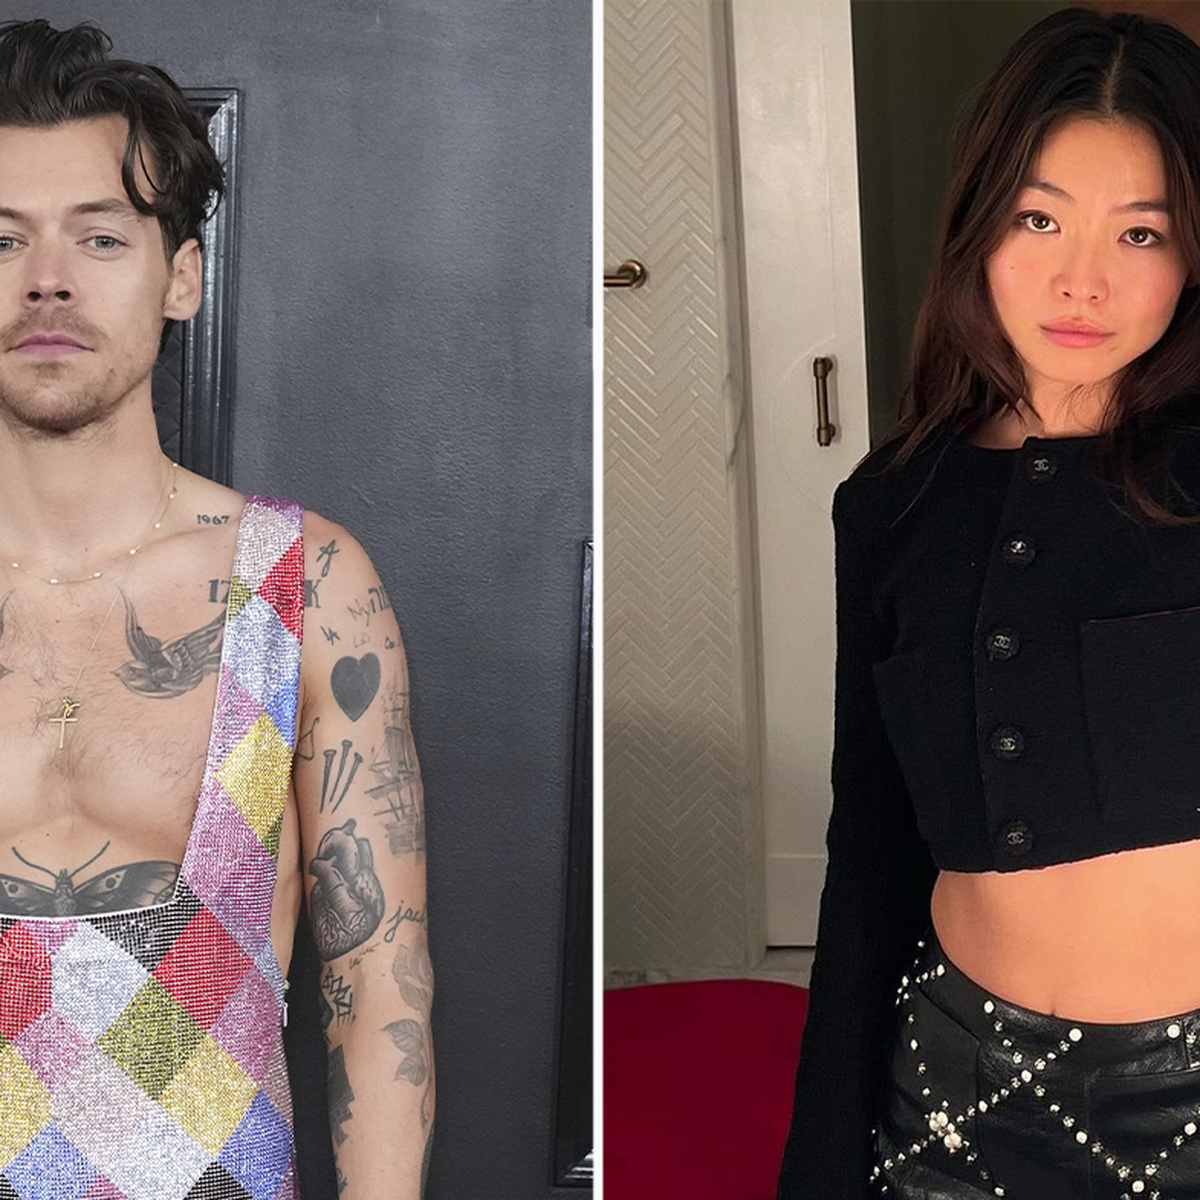 Harry Styles 'slid into DMS' of Yan Yan Chan – but who is she